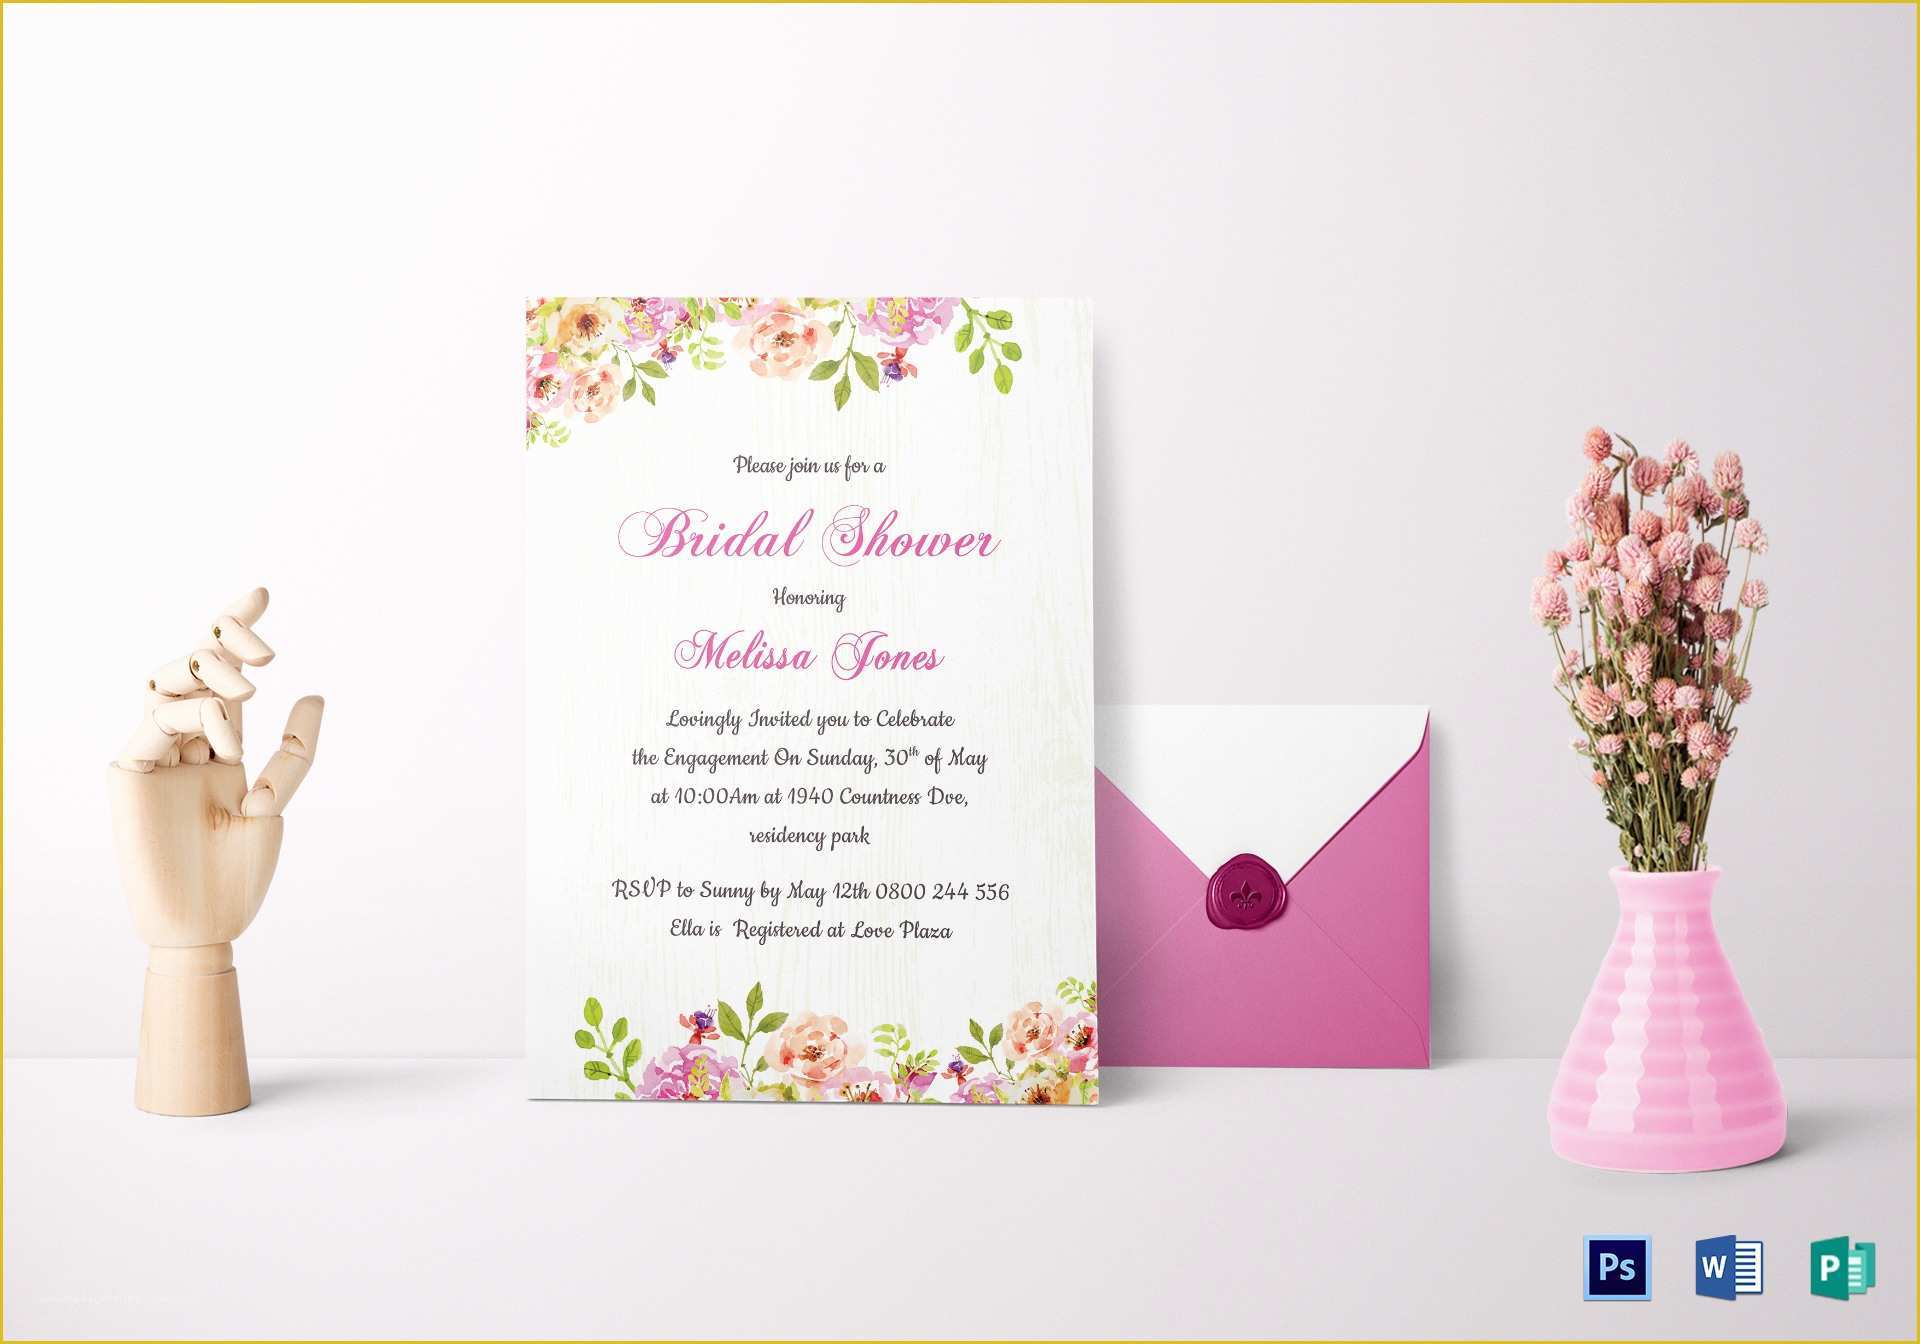 Free Bridal Shower Invitation Templates Photoshop Of Floral Bridal Shower Invitation Card Design Template In